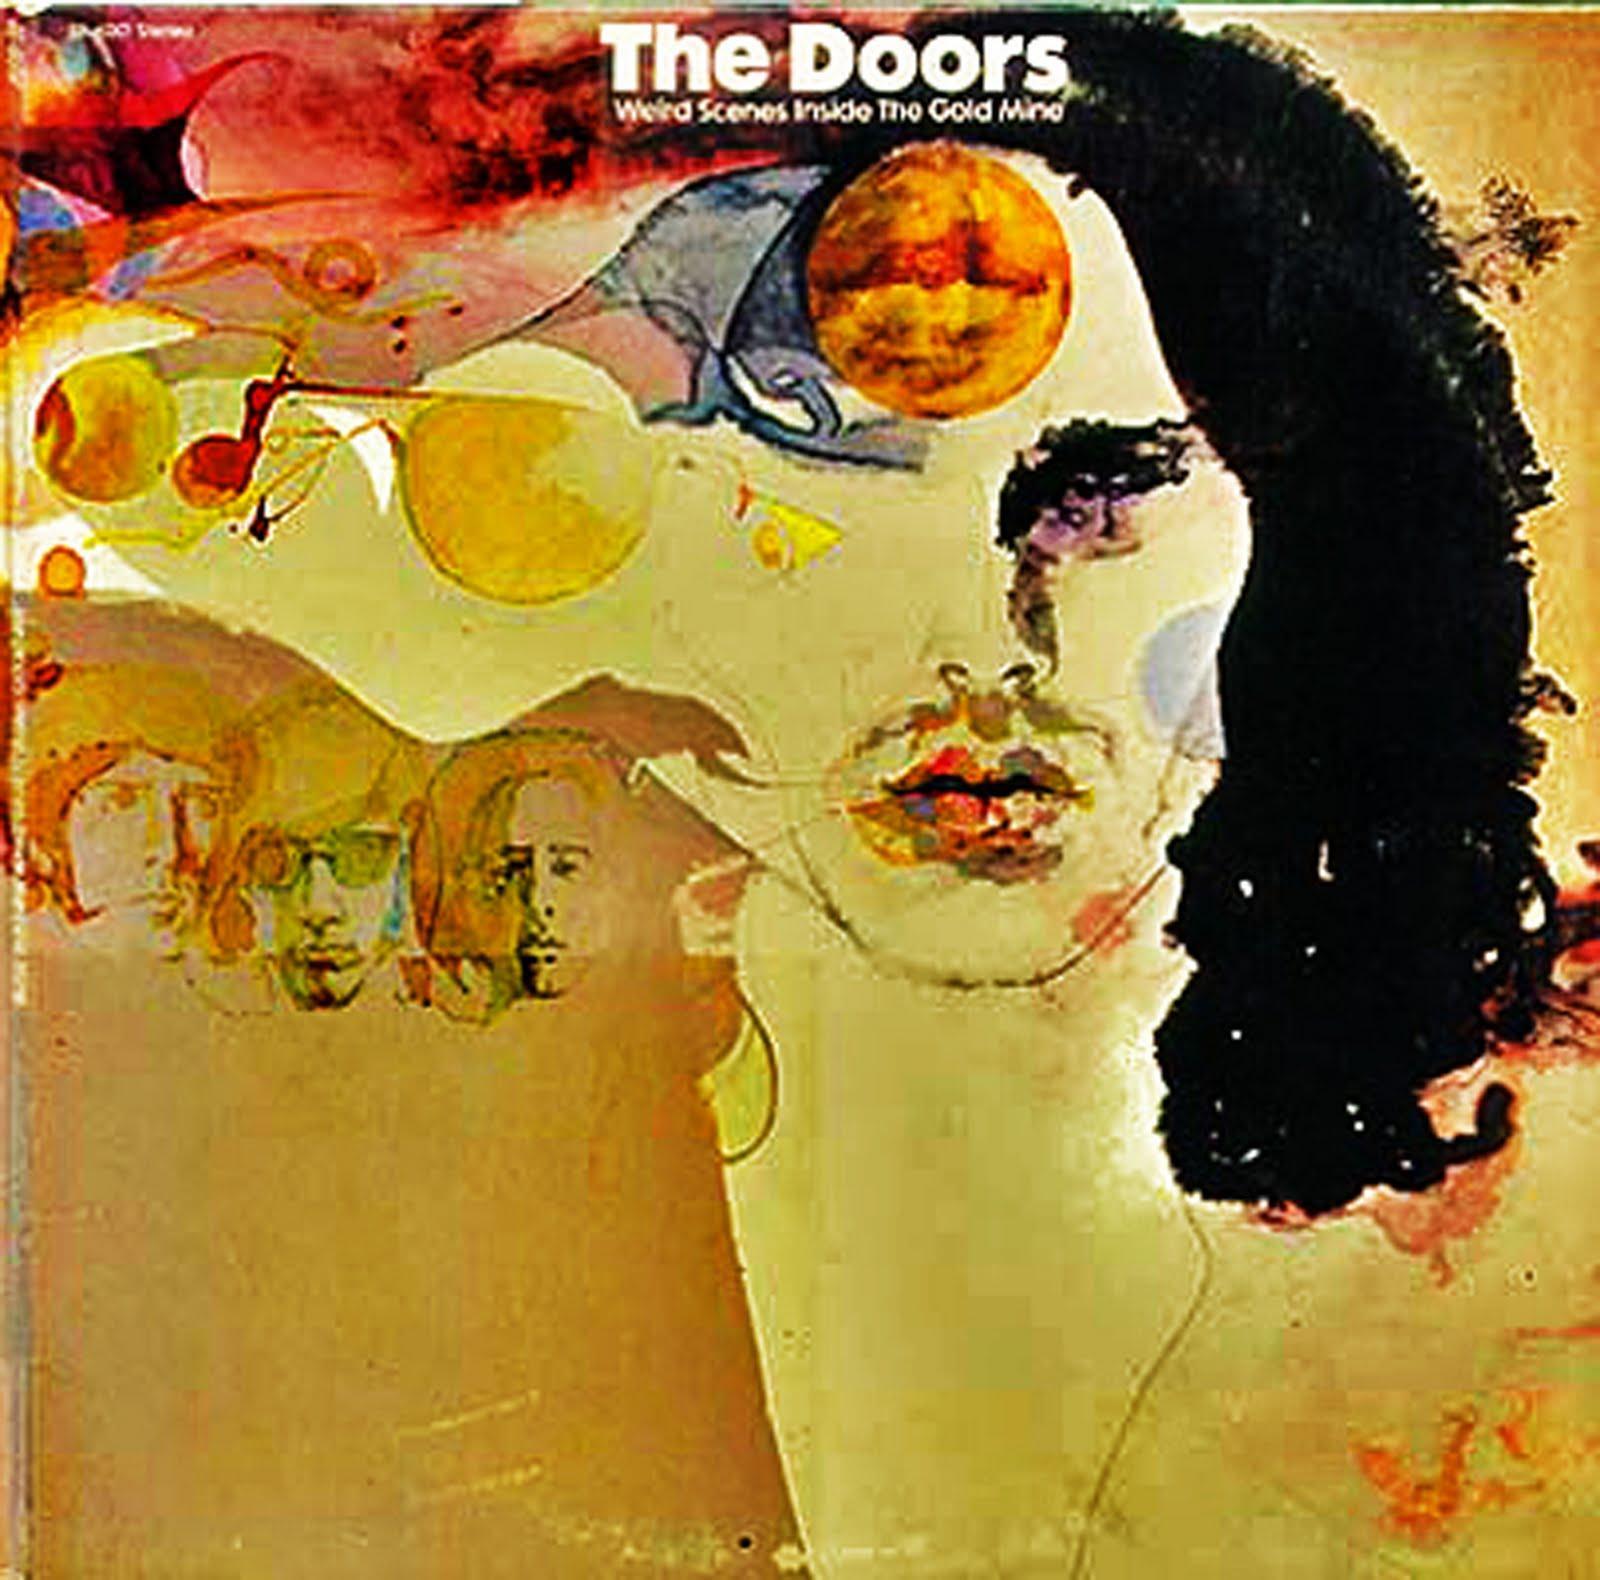 The Doors Scenes Inside The Goldmines Record Covers